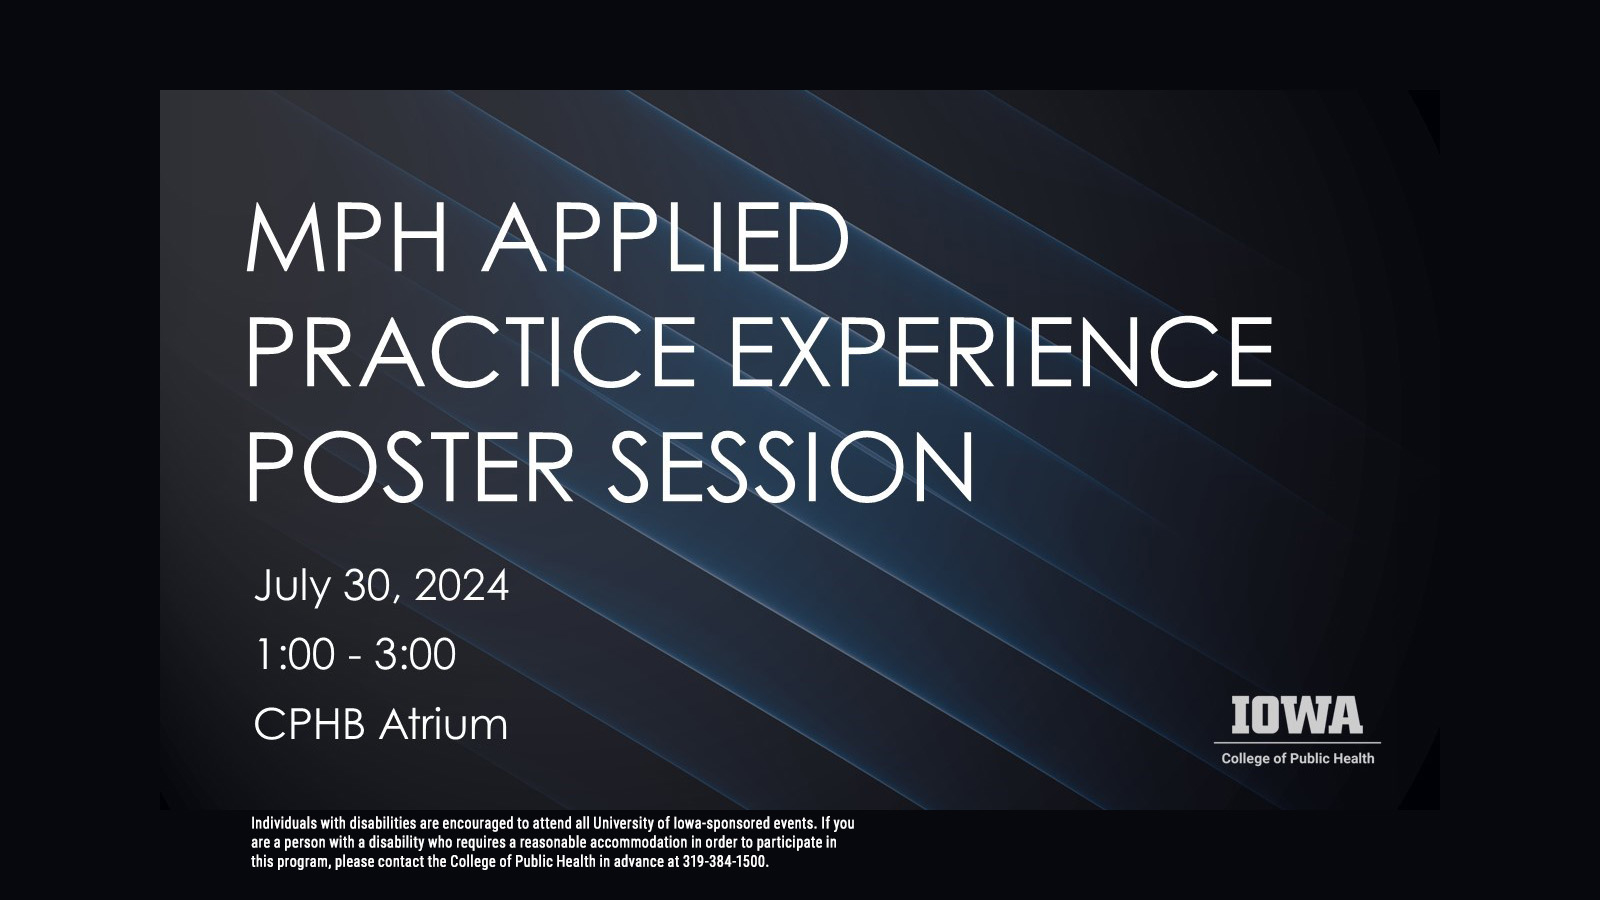 MPH applied practice experience poster session is July 30 from 1 to 3 pm in the CPHB atrium.